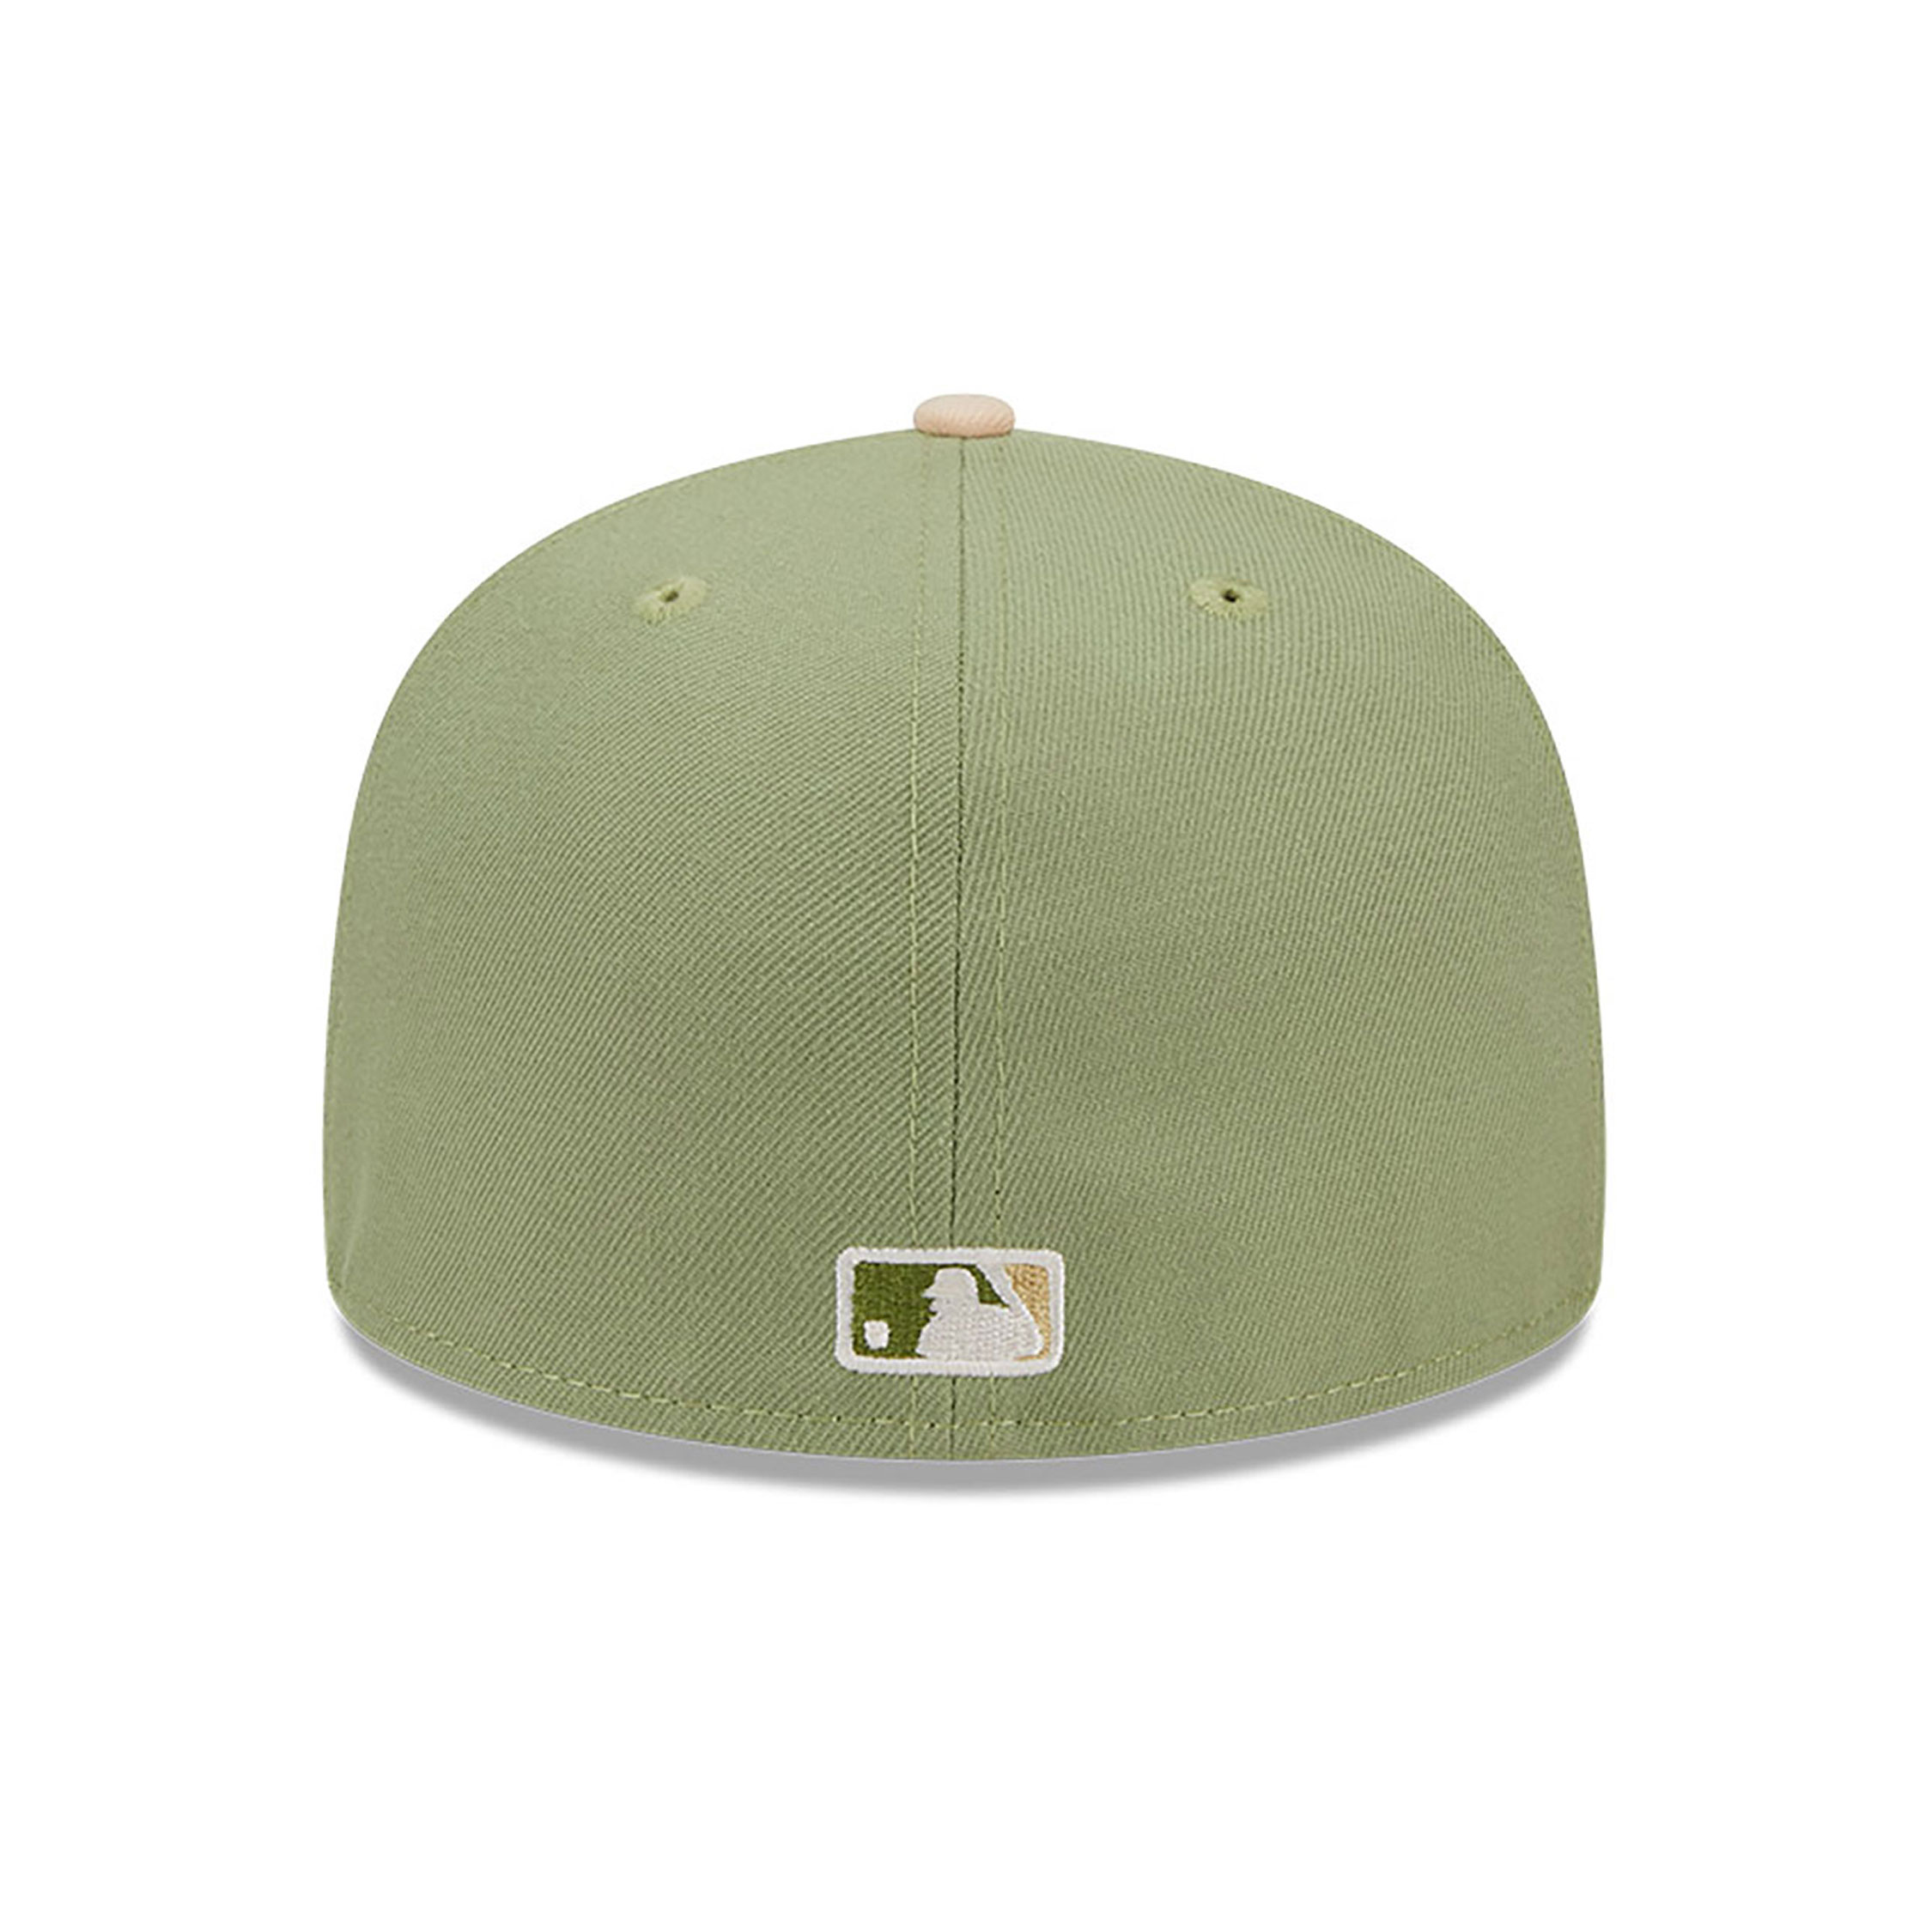 Oakland Athletics Thermal Front Pastel Green 59FIFTY Fitted Cap